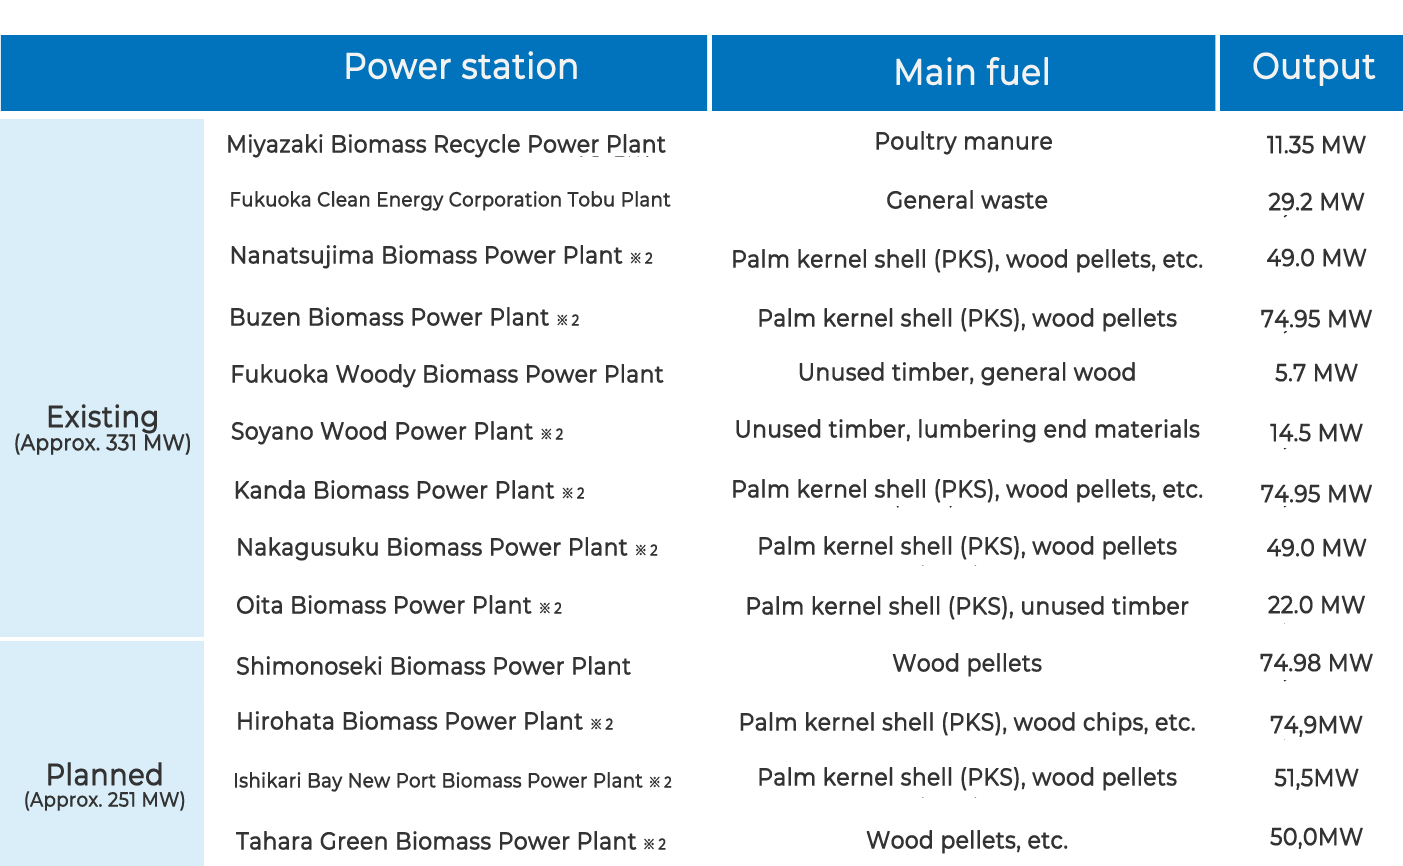 List of biomass power generation facilities (end of February 2022)